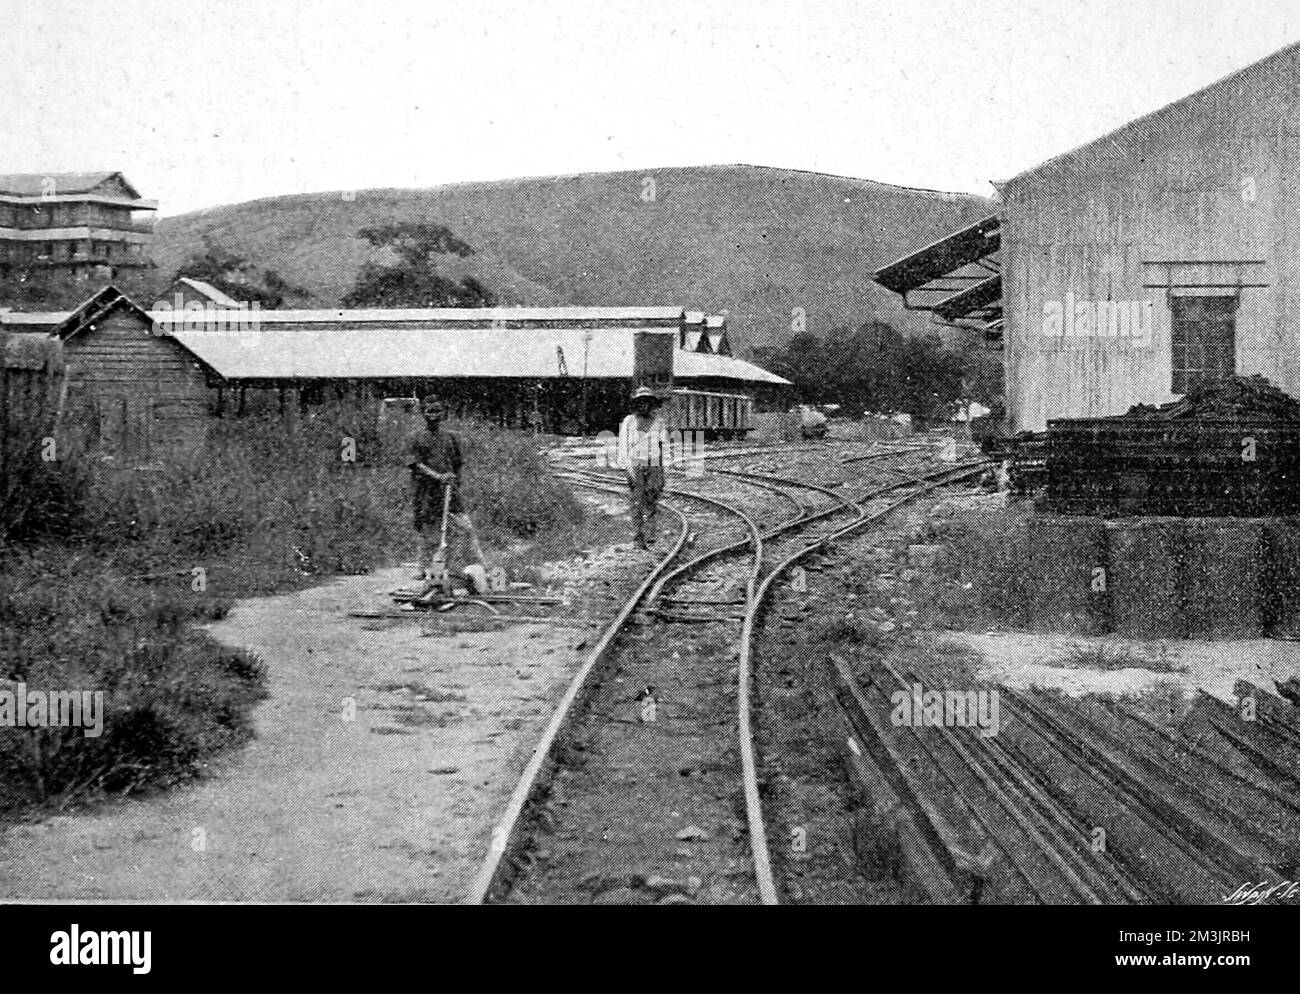 Station at Matadi, forming part of the new Congo railway from Matadi to Stanley Pool. The railway took nine years to complete, and in the first five years only 25 miles of track was constructed. The railway was crucial to the development of the Congo region, enabling trade to be transported from region to region.  1898 Stock Photo